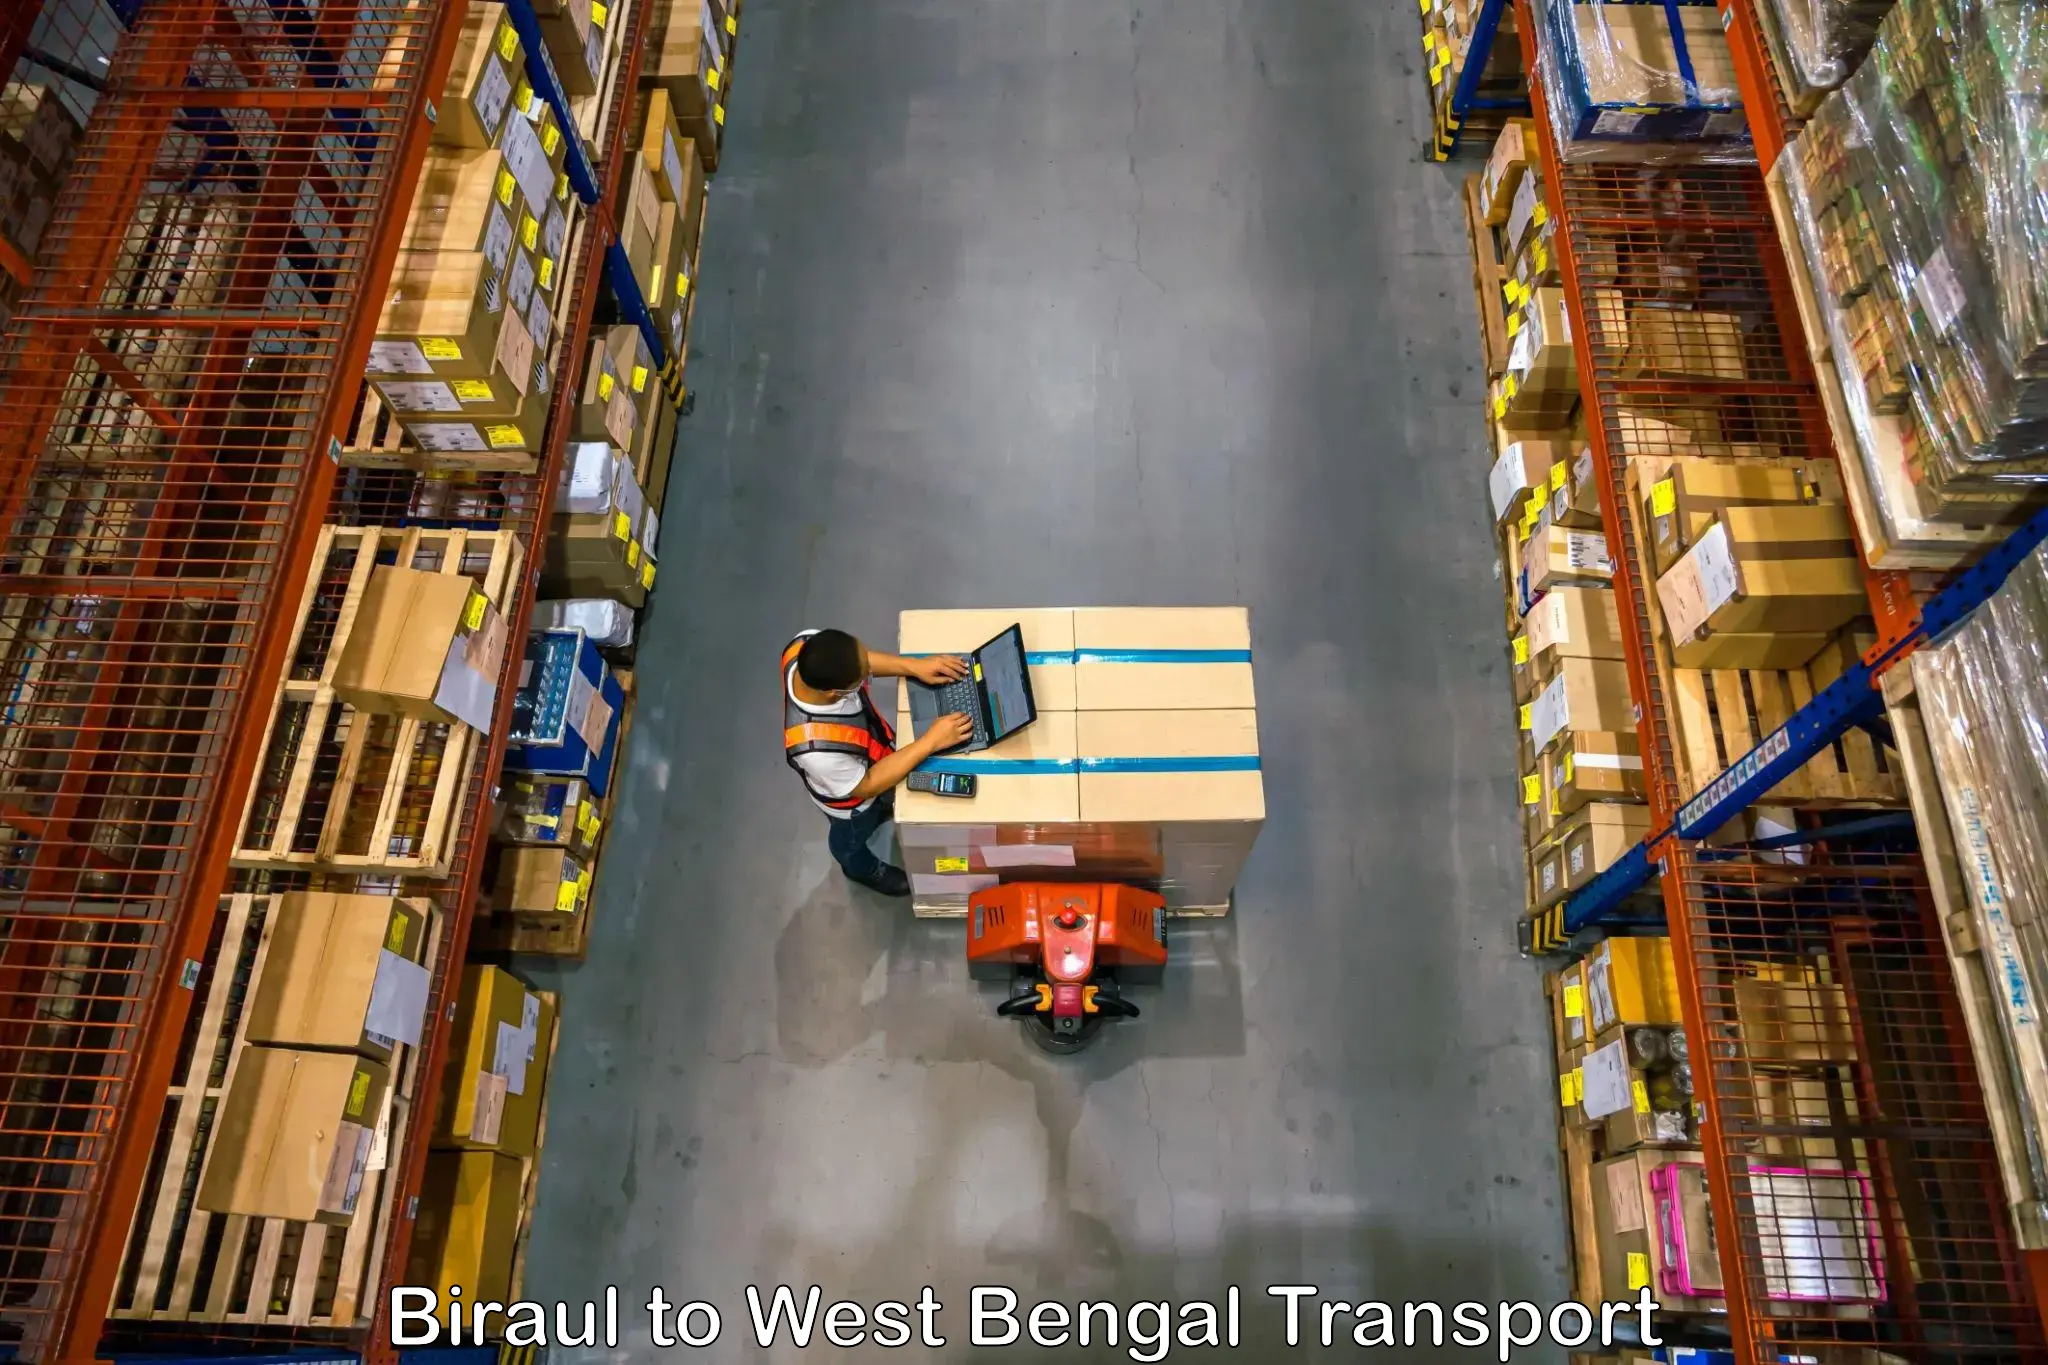 Express transport services in Biraul to Bagdogra